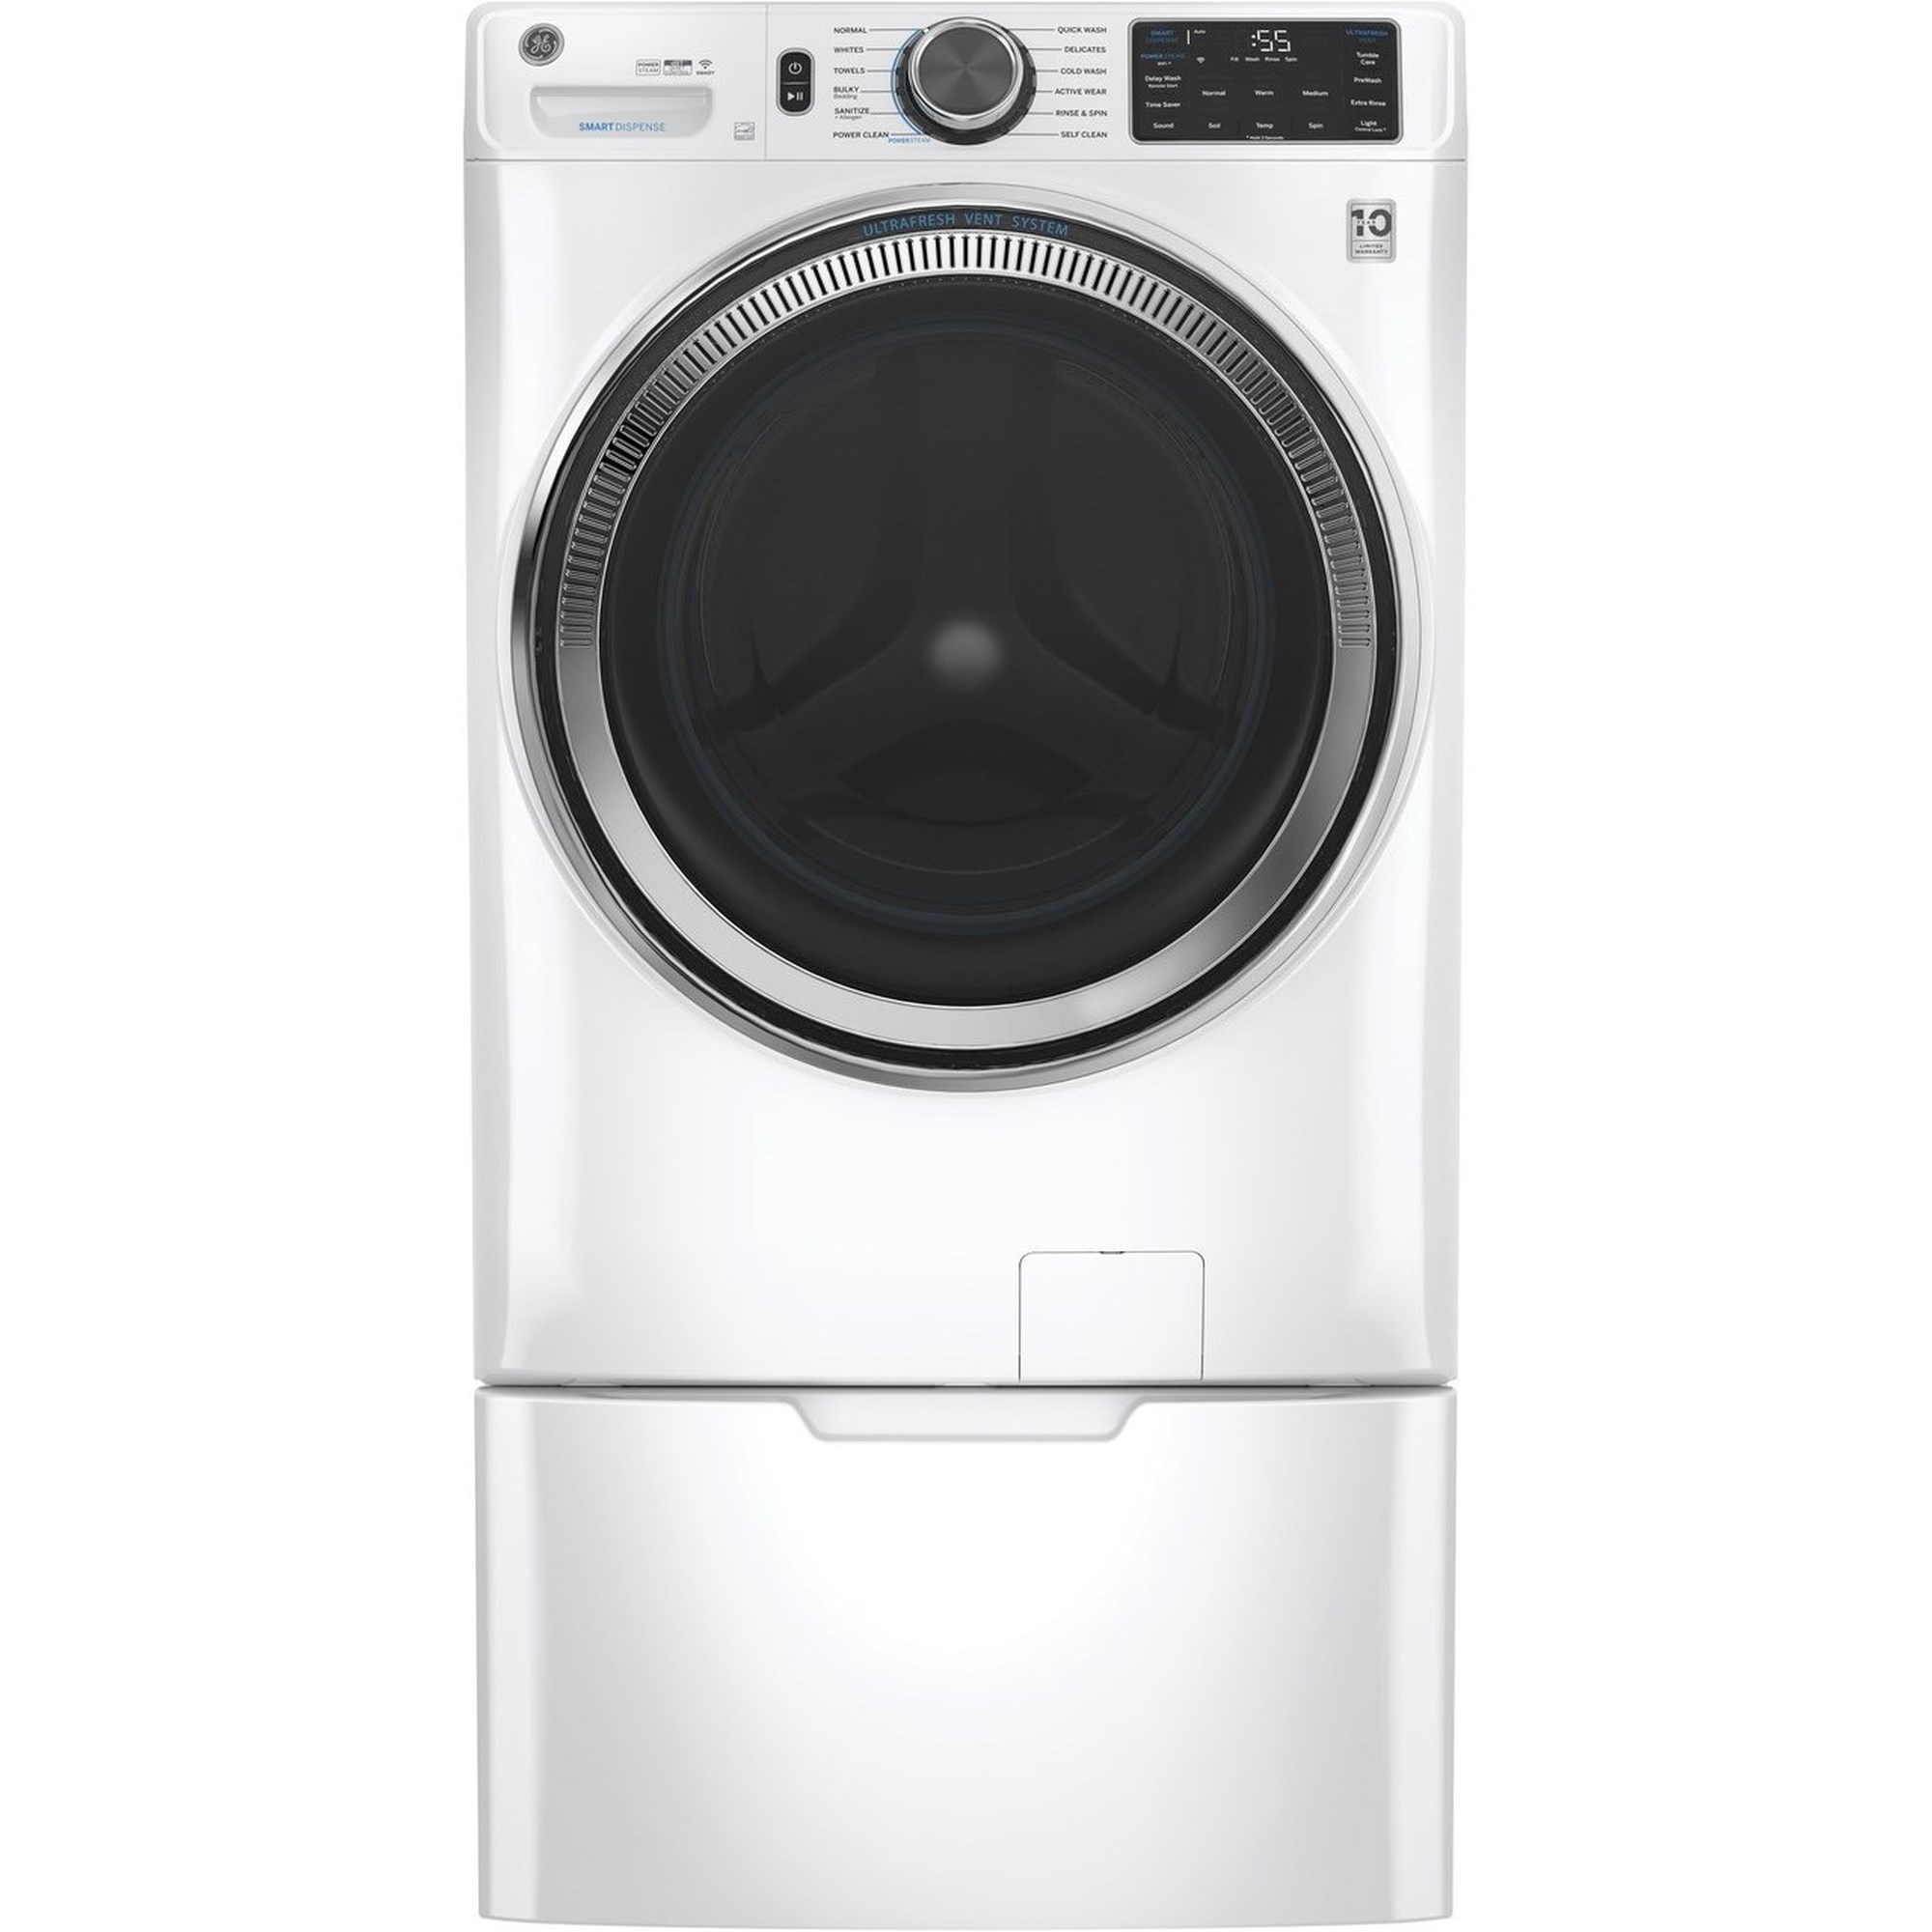  WASHER/DRYER 2000S VENTED : Appliances